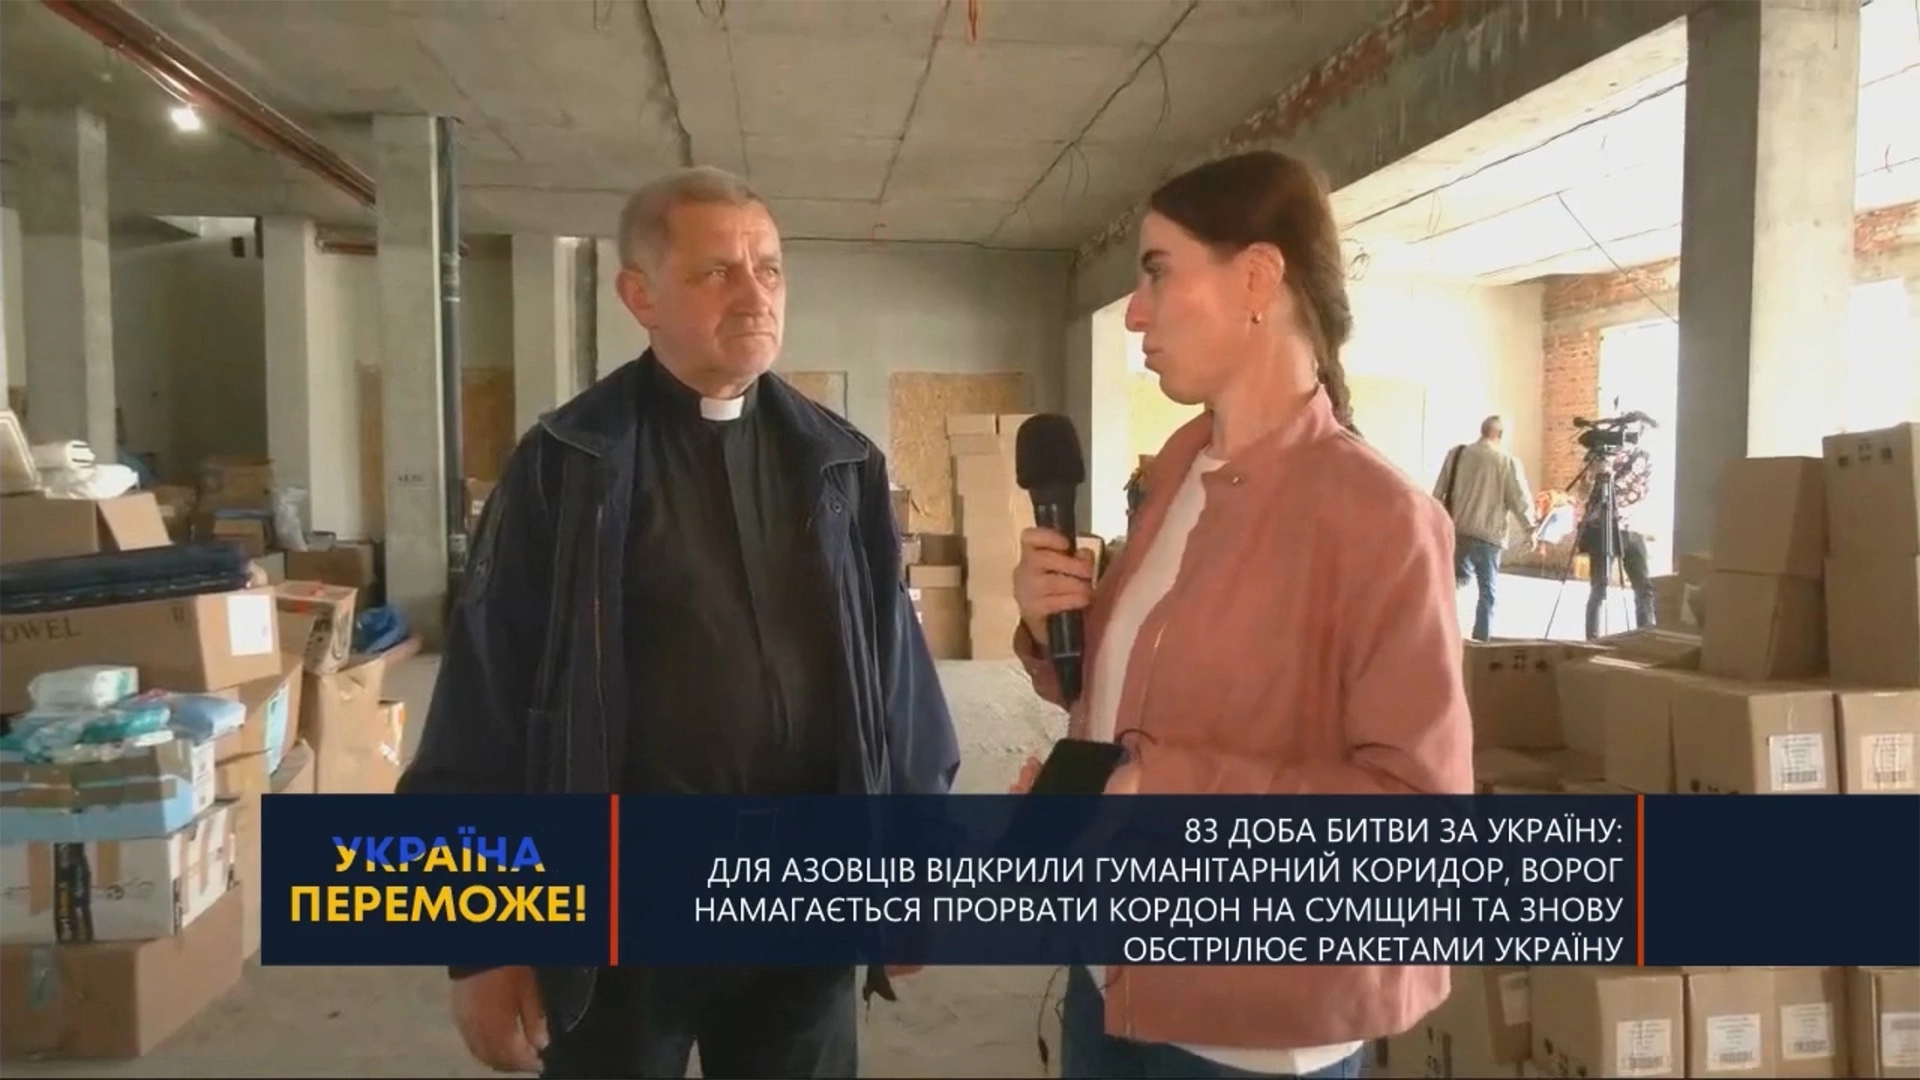 Catholic Church of Khemelnitskiy speaking with the Ukrainian news about an iLoveUkraine aid delivery.